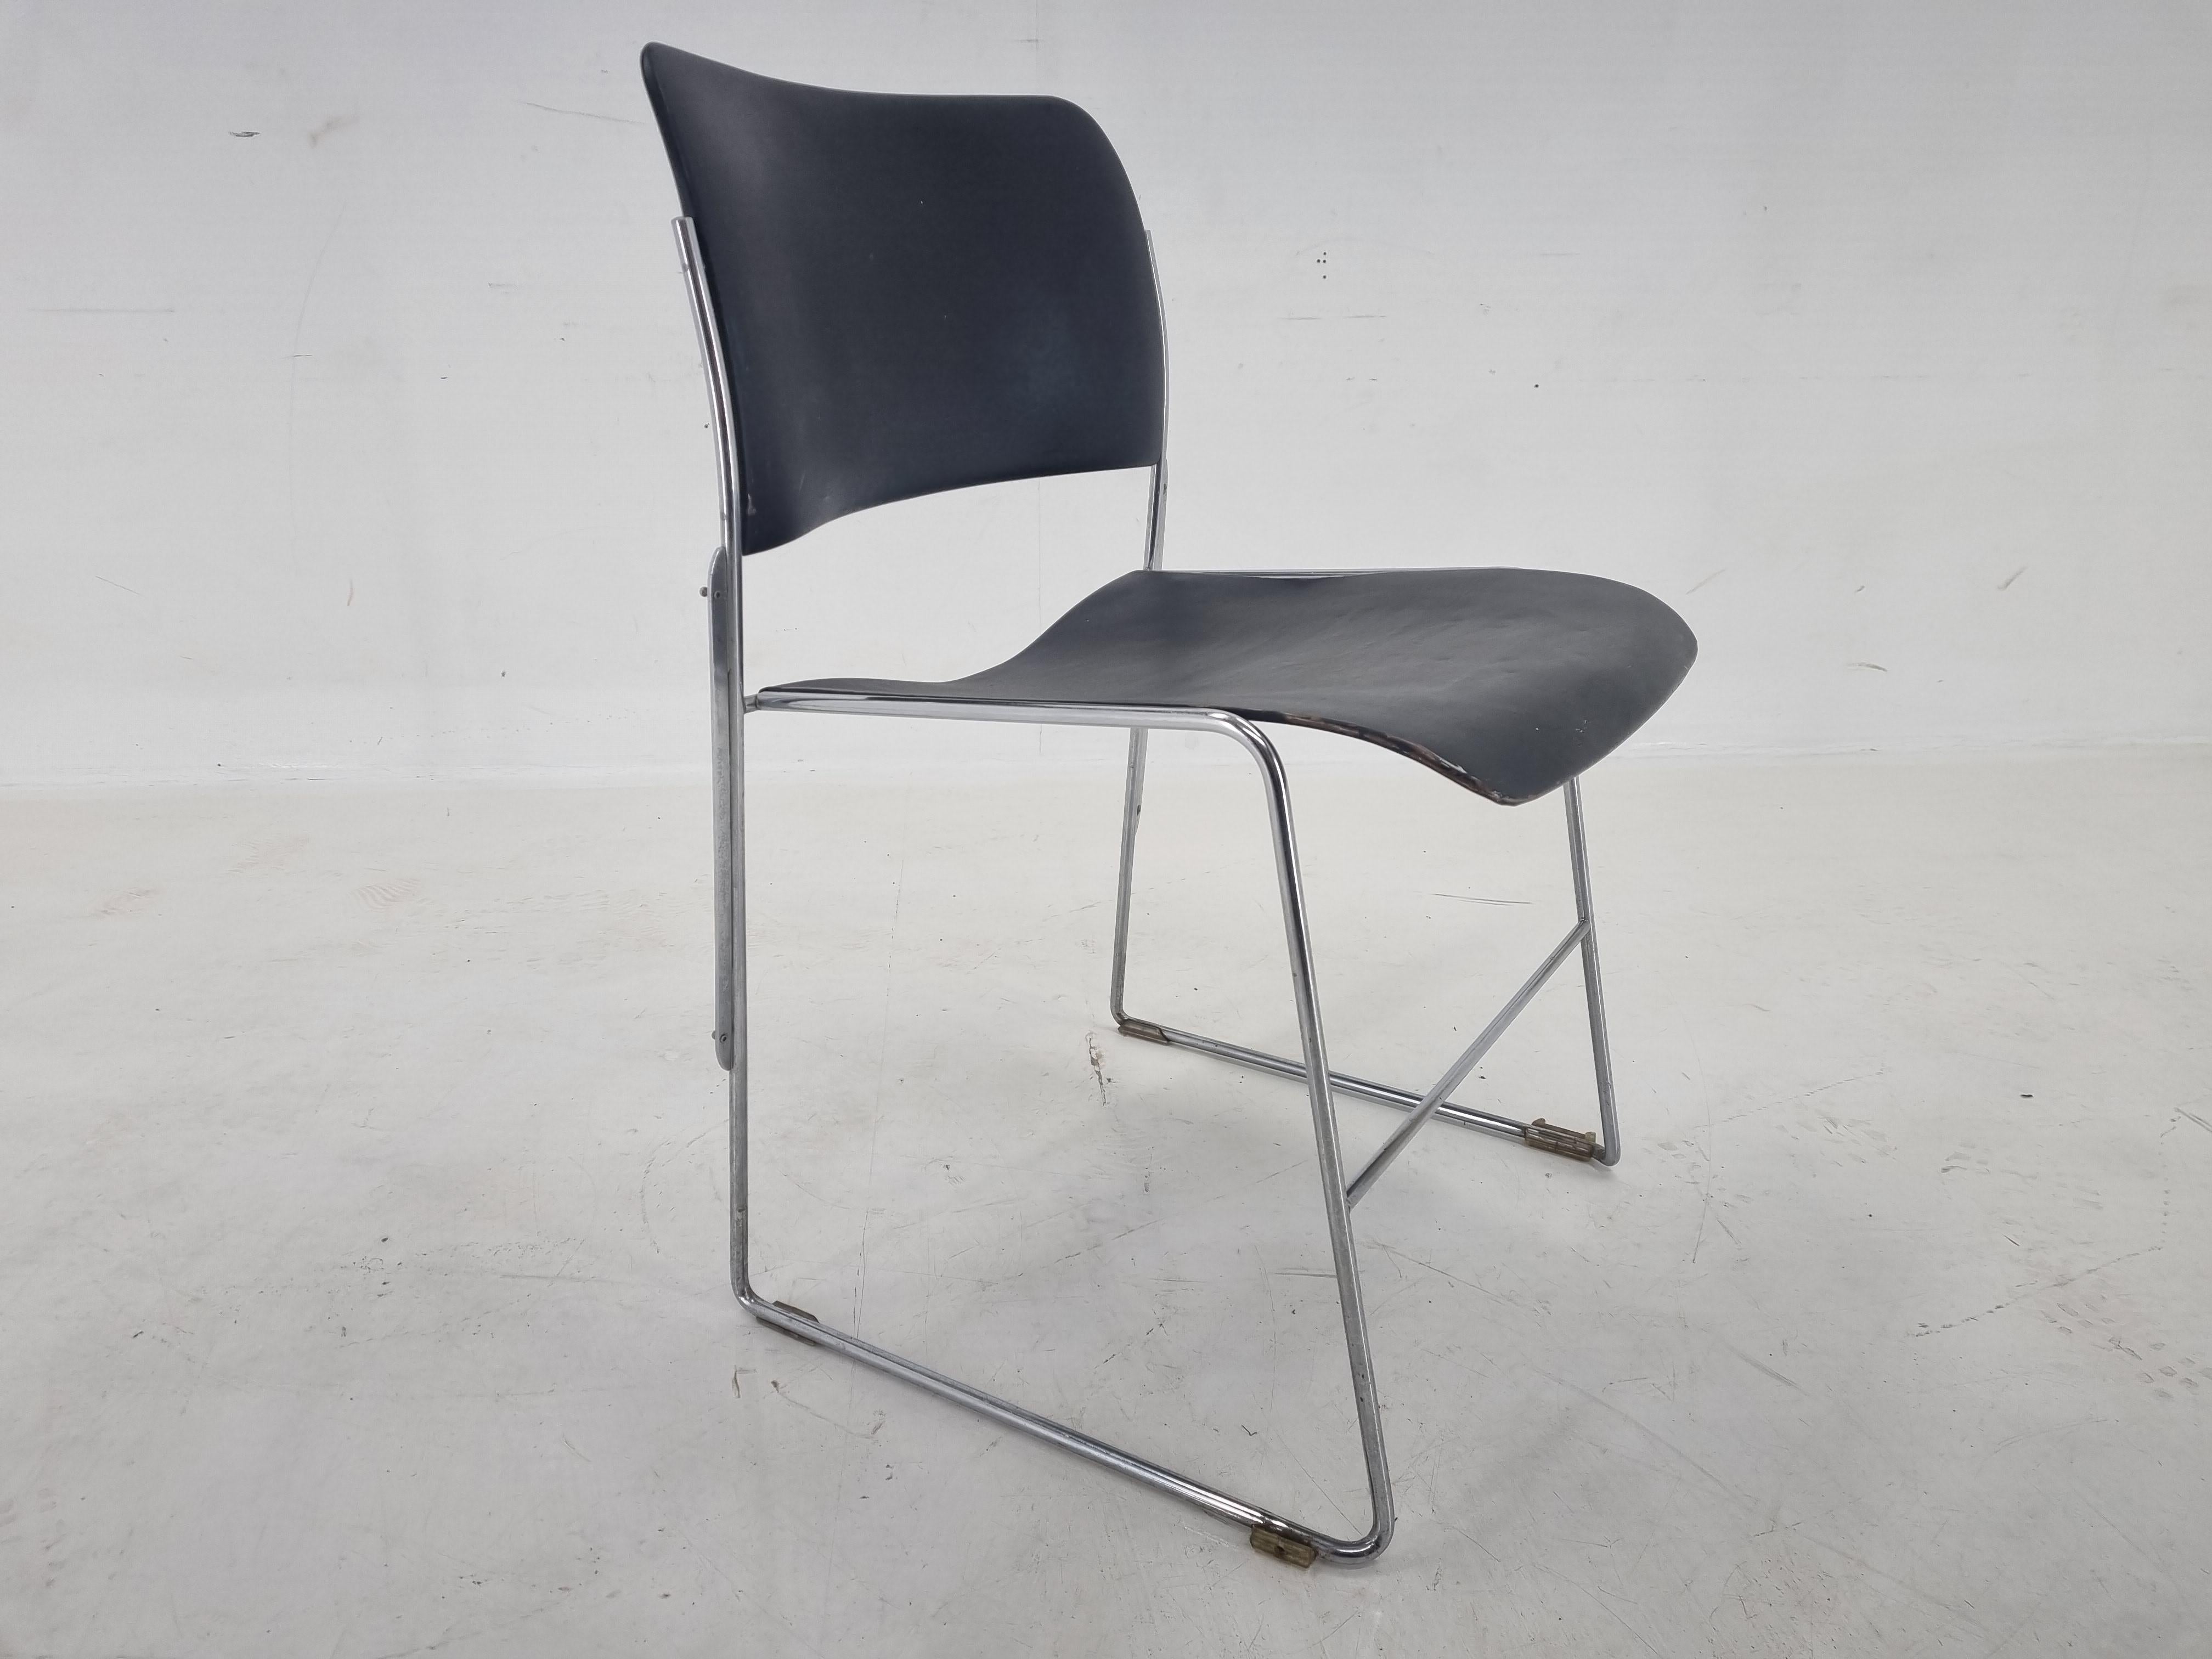 American Midcentury David Rowland 40/4 Black and Chrome Side Chair, 1970 For Sale